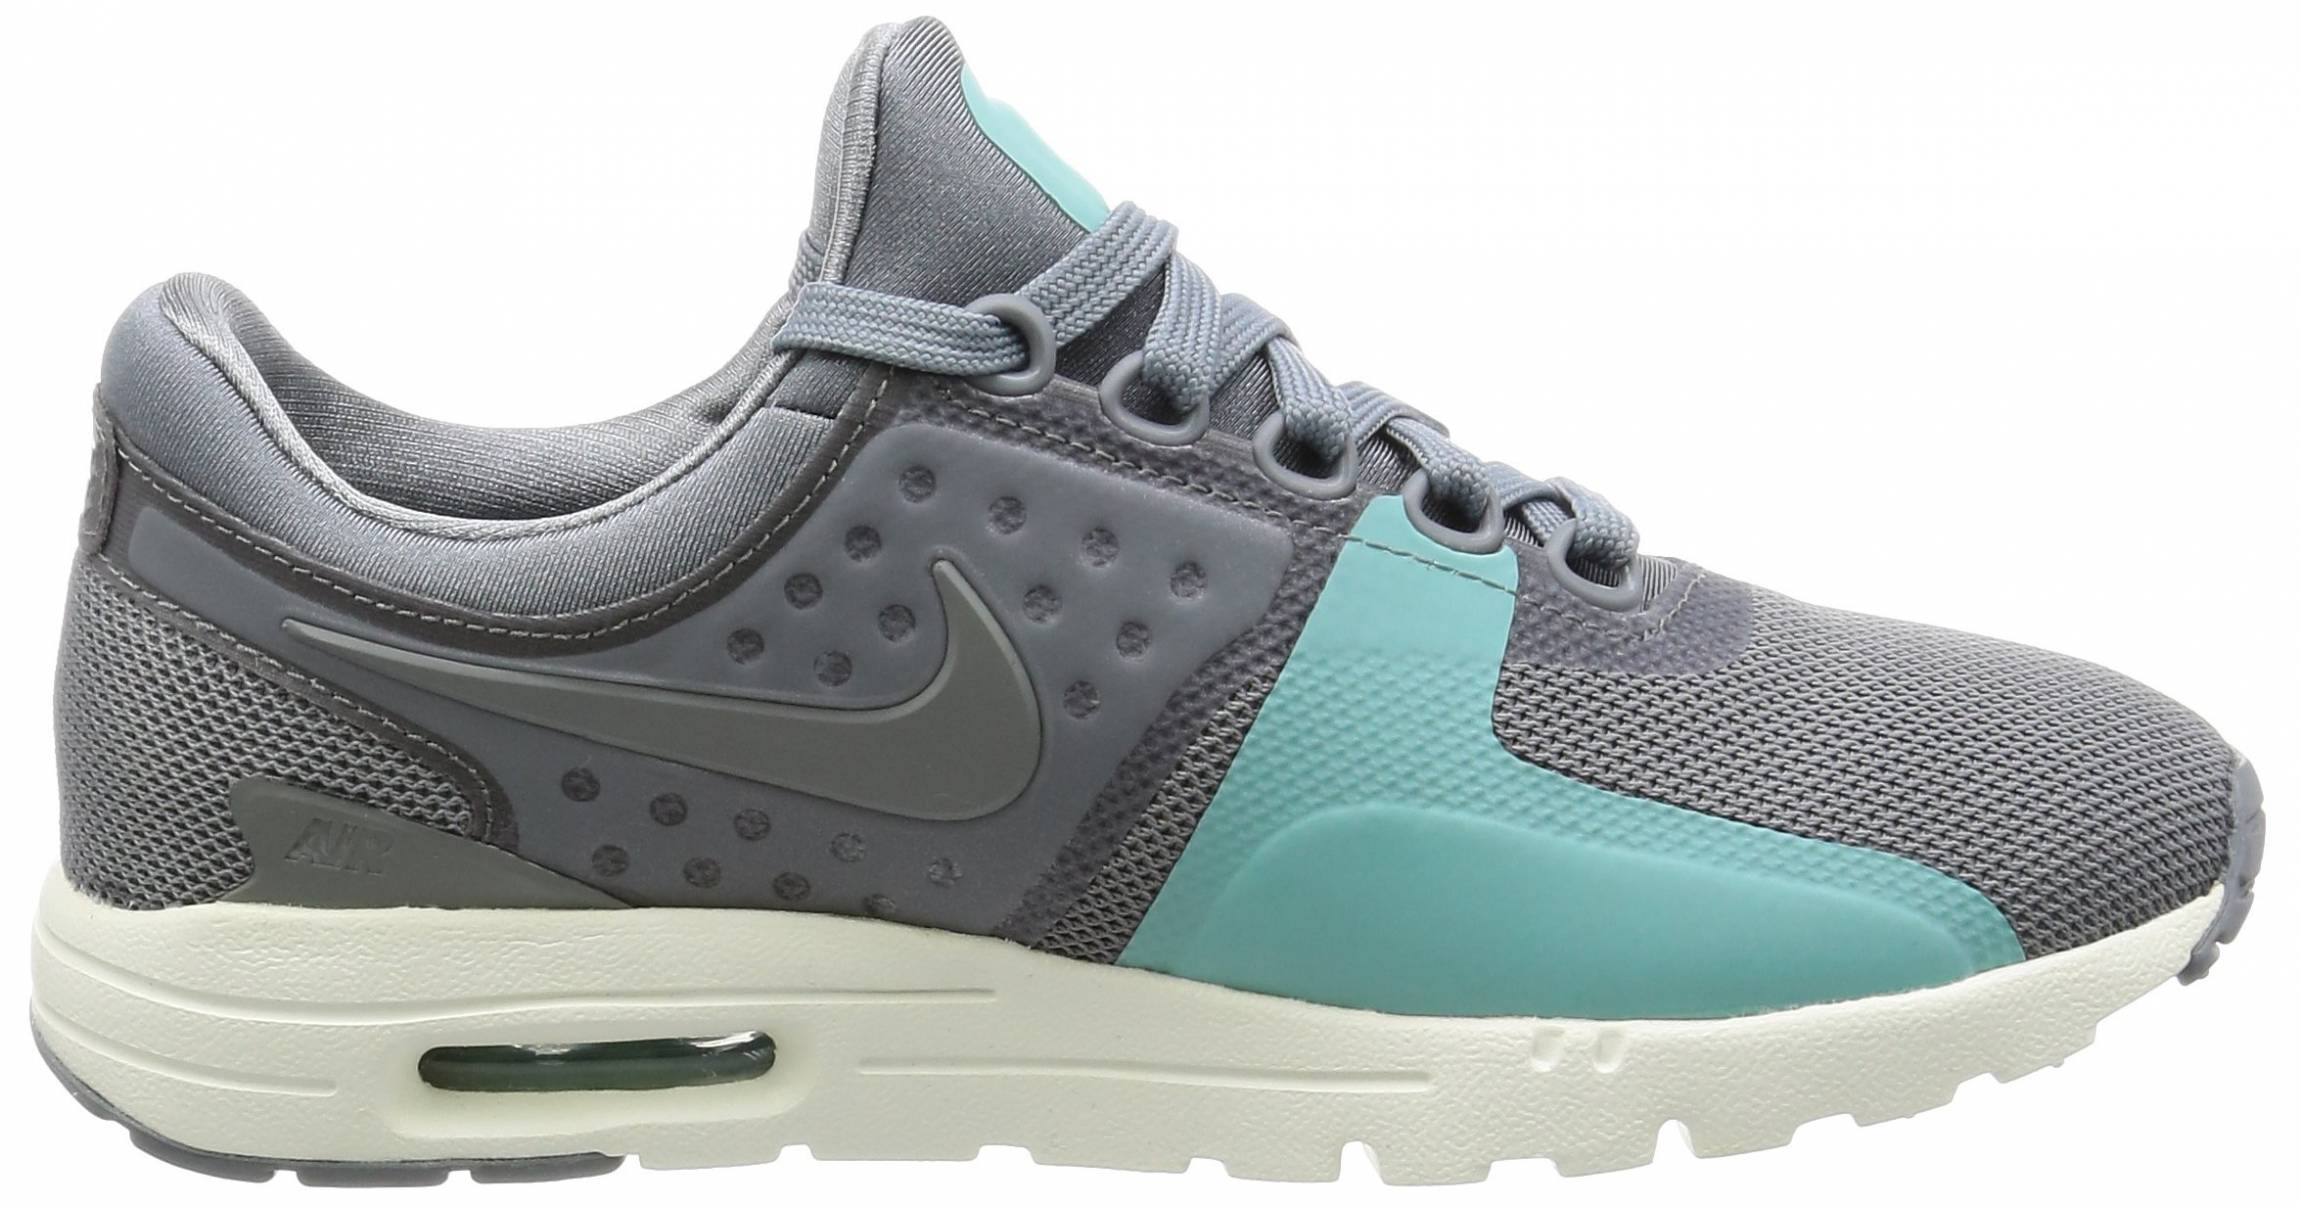 Only $111 + Review of Nike Air Max Zero 